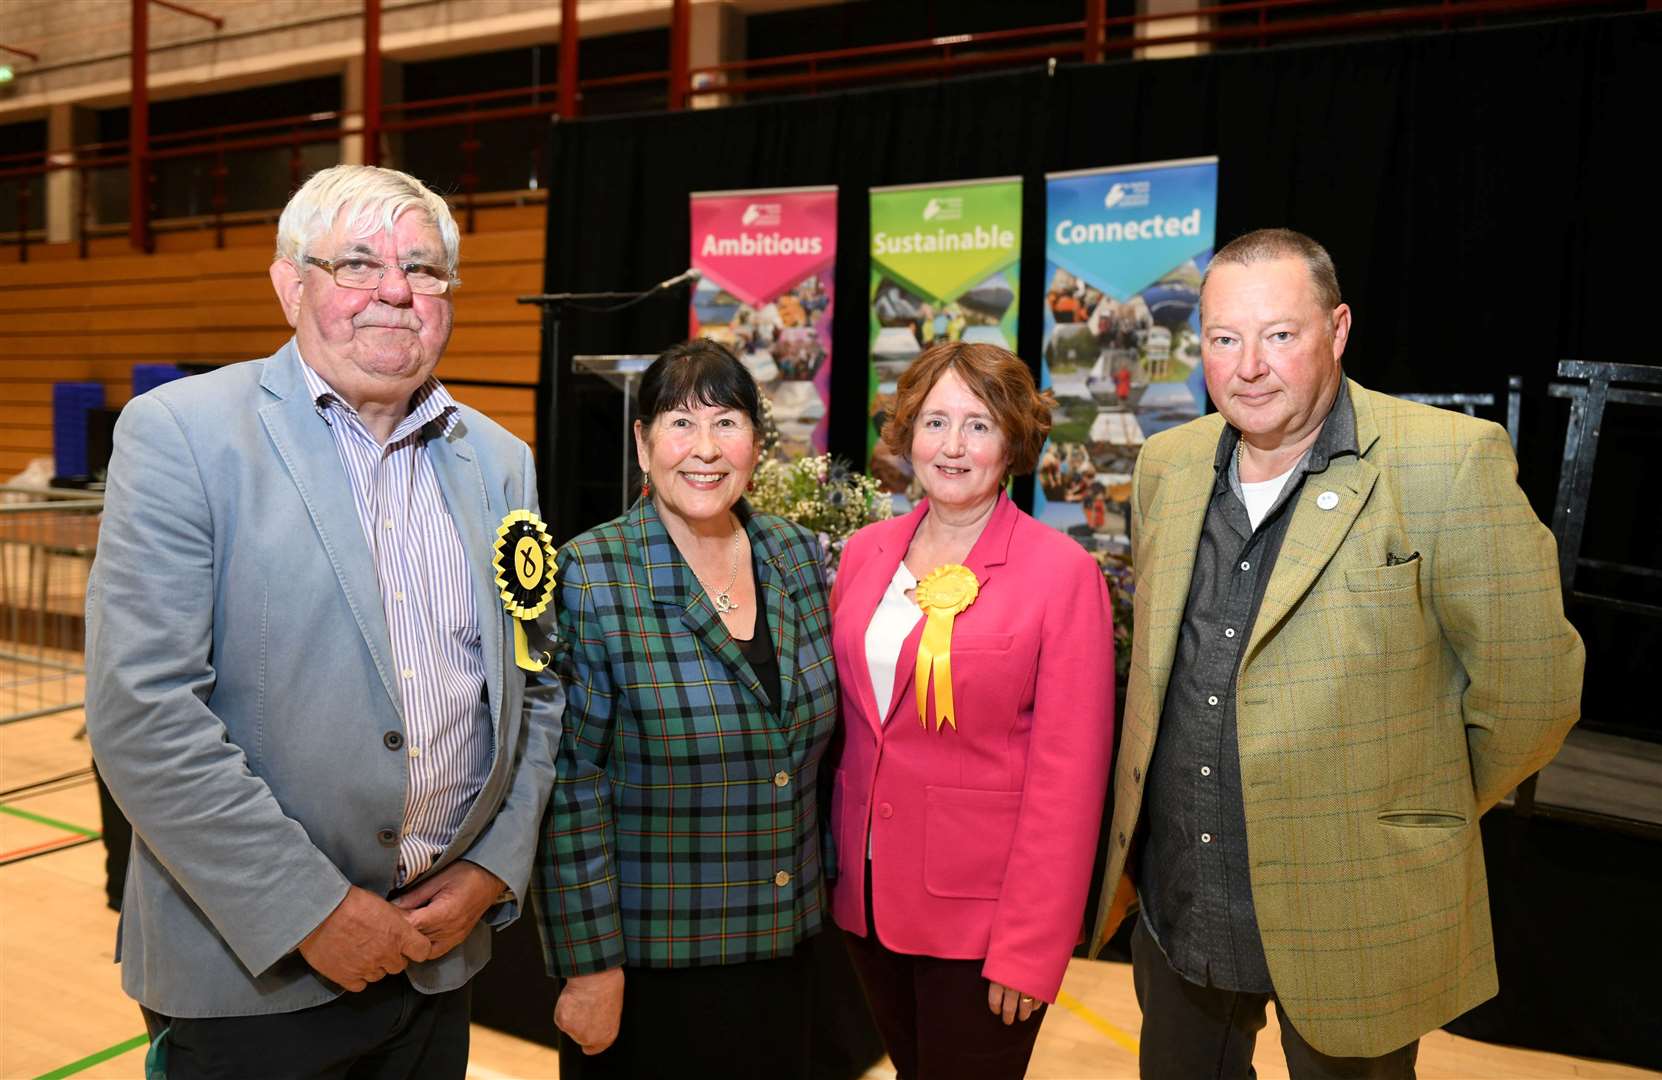 Councillors by Ward: 08 Dingwall and Seaforth: Graham Alexander MacKenzie (Scottish National Party), Margaret Paterson (Independent), Angela MacLean (Scottish Liberal Democrats) and Sean Edward Kennedy (Independent). Picture: Callum Mackay